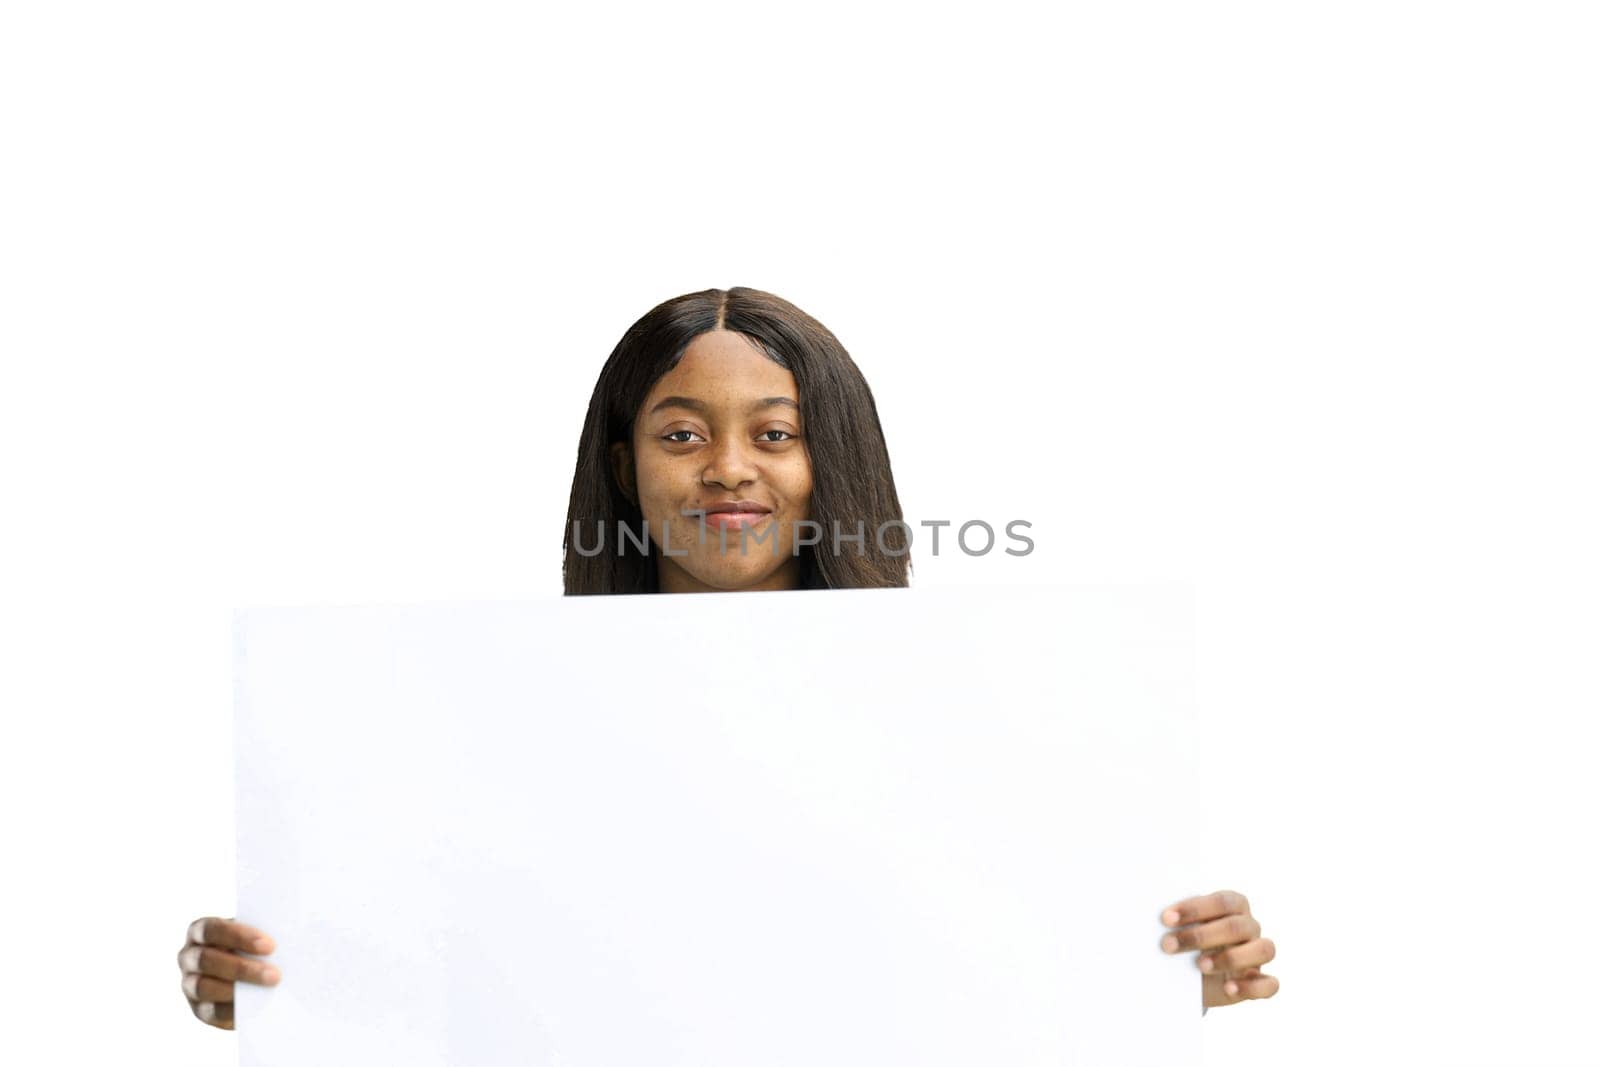 Woman, on a white background, close-up, with a white sheet.